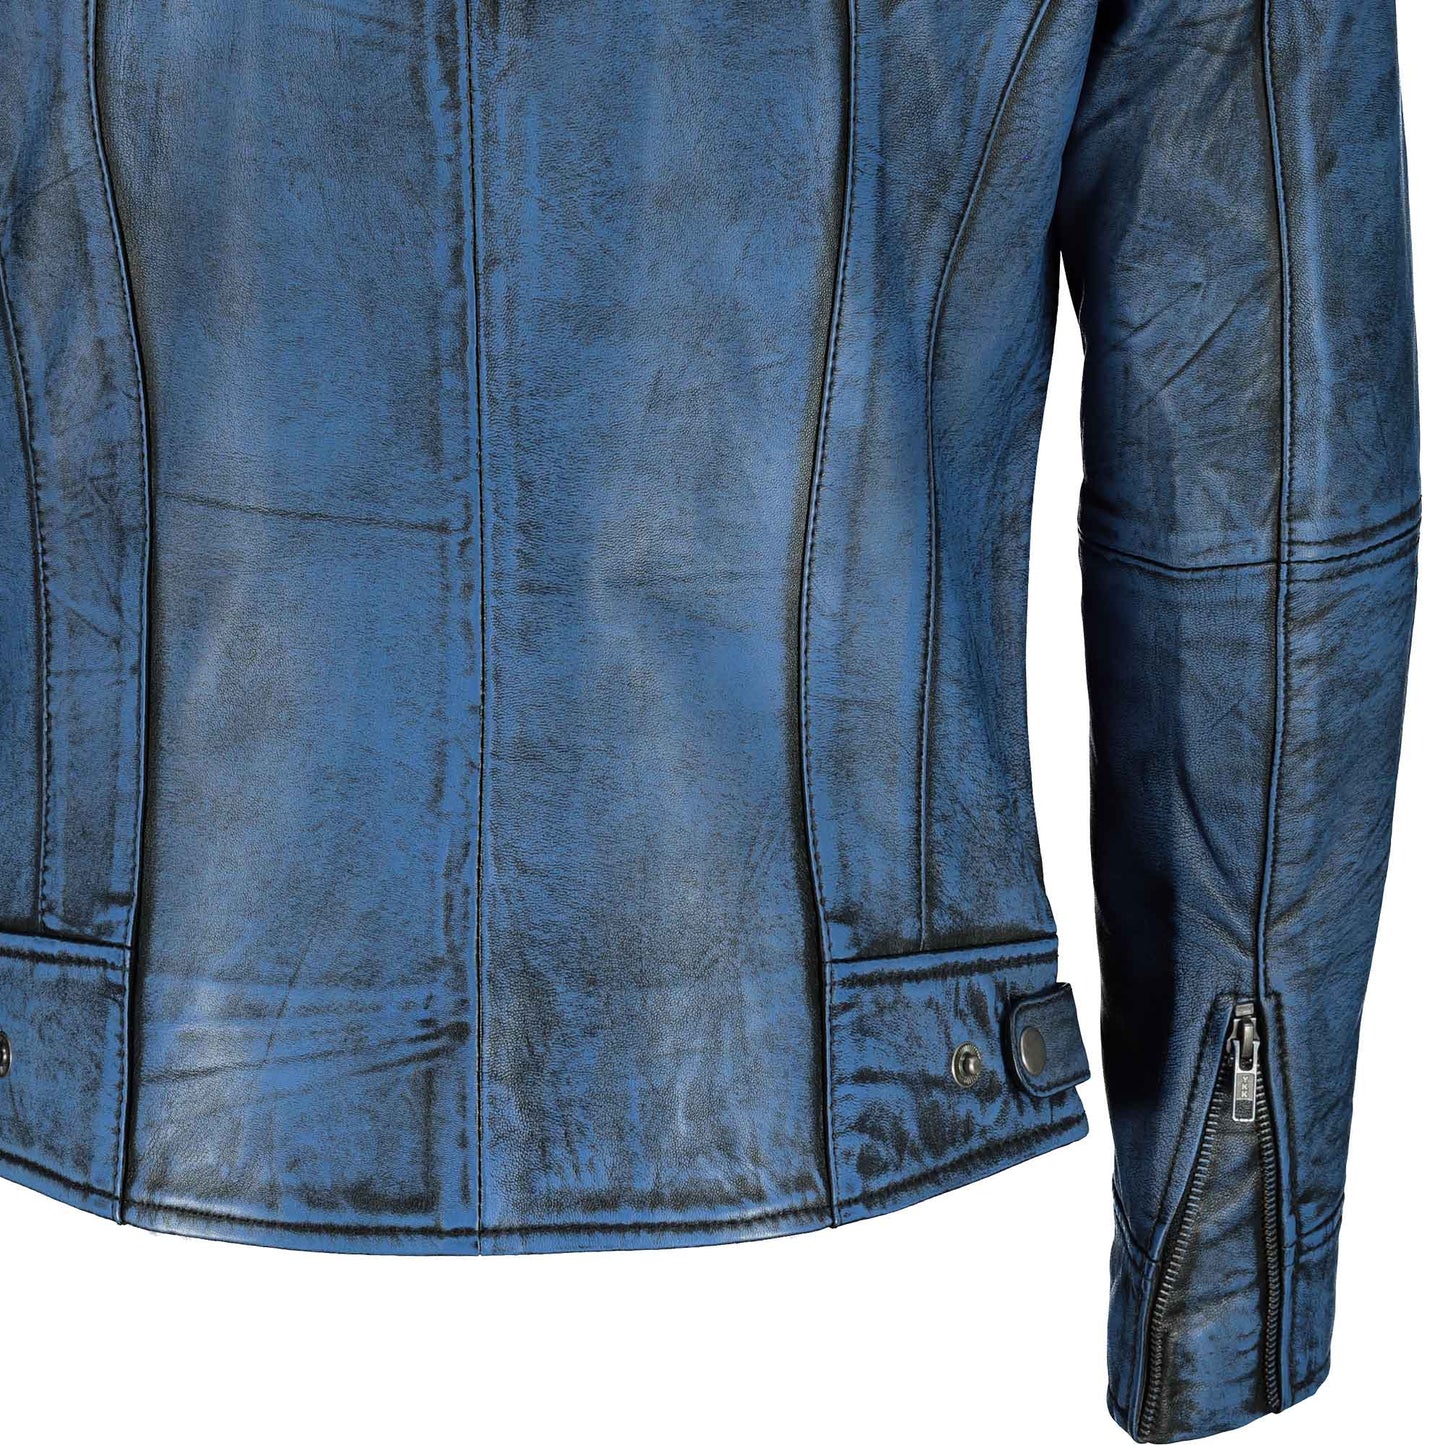 Classic Slim Fit Leather Jacket (Stained Blue)- Supreme Leather Supreme Leather